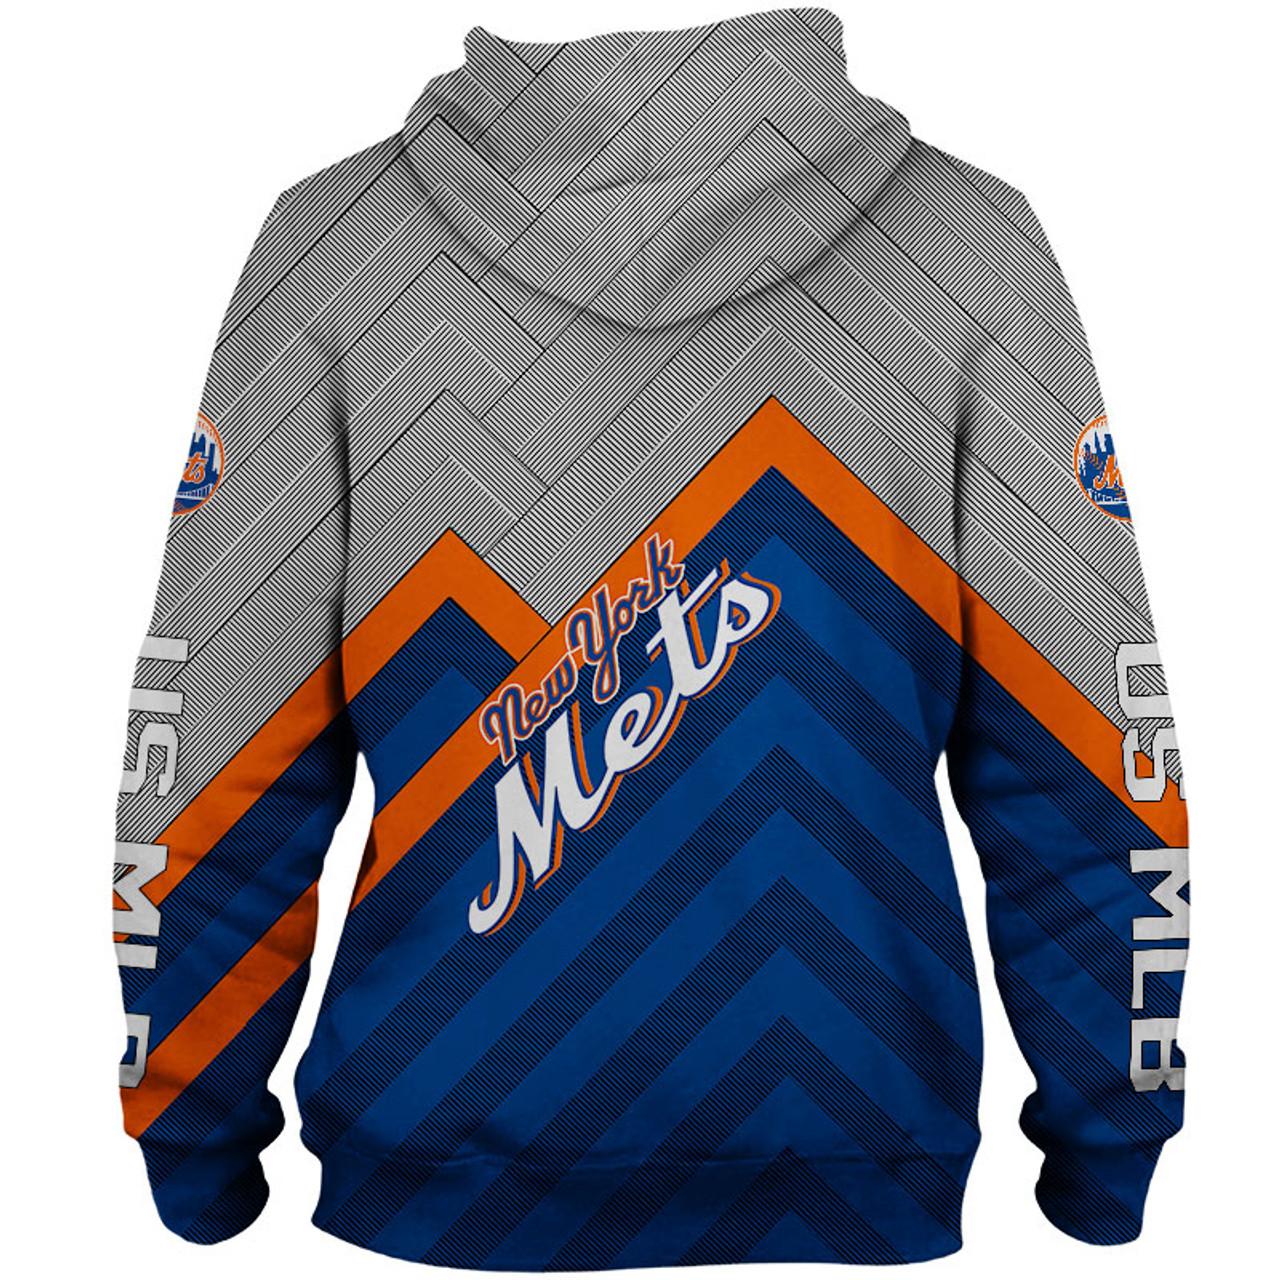 **(OFFICIAL-M.L.B.NEW-YORK-METS-TEAM-PULLOVER-HOODIES/CUSTOM-DETAILED-3D-GRAPHIC-PRINTED/PREMIUM-ALL-OVER-DOUBLE-SIDED-PRINT/OFFICIAL-METS-TEAM-COLORS & CLASSIC-METS-3D-GRAPHIC-LOGOS/WARM-NEW-PREMIUM-POCKET-PULLOVER-M.L.B.METS-HOODIES)**